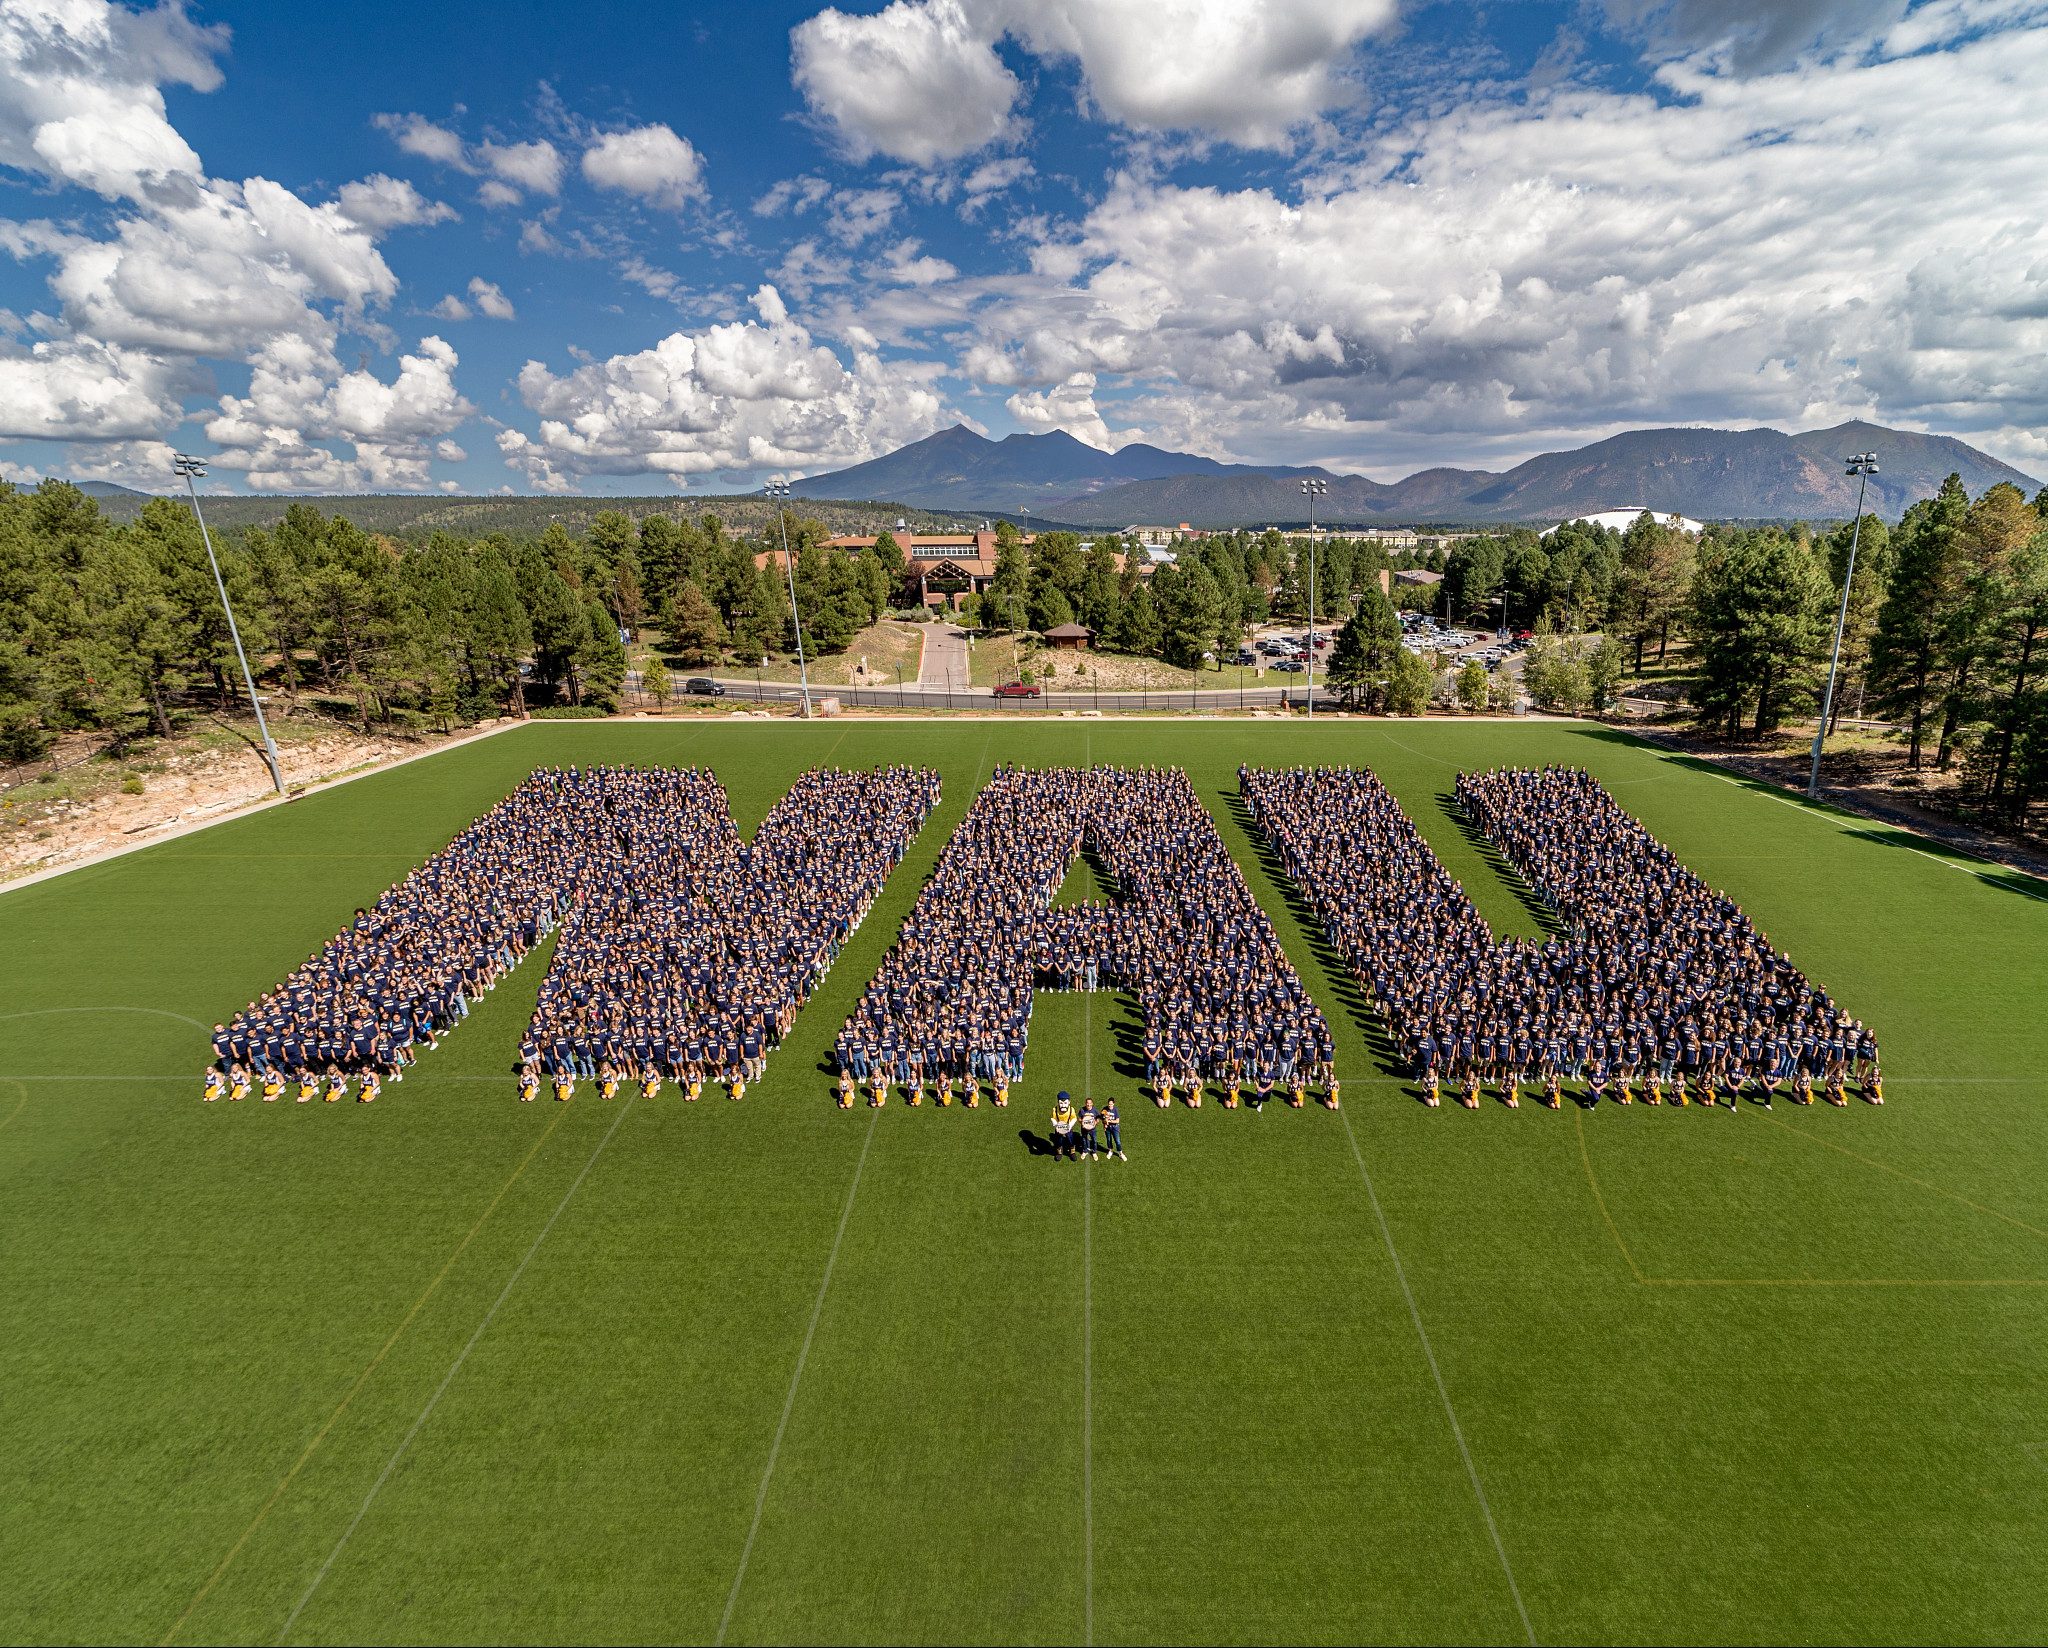 Hundreds of people forming the letters "NAU".